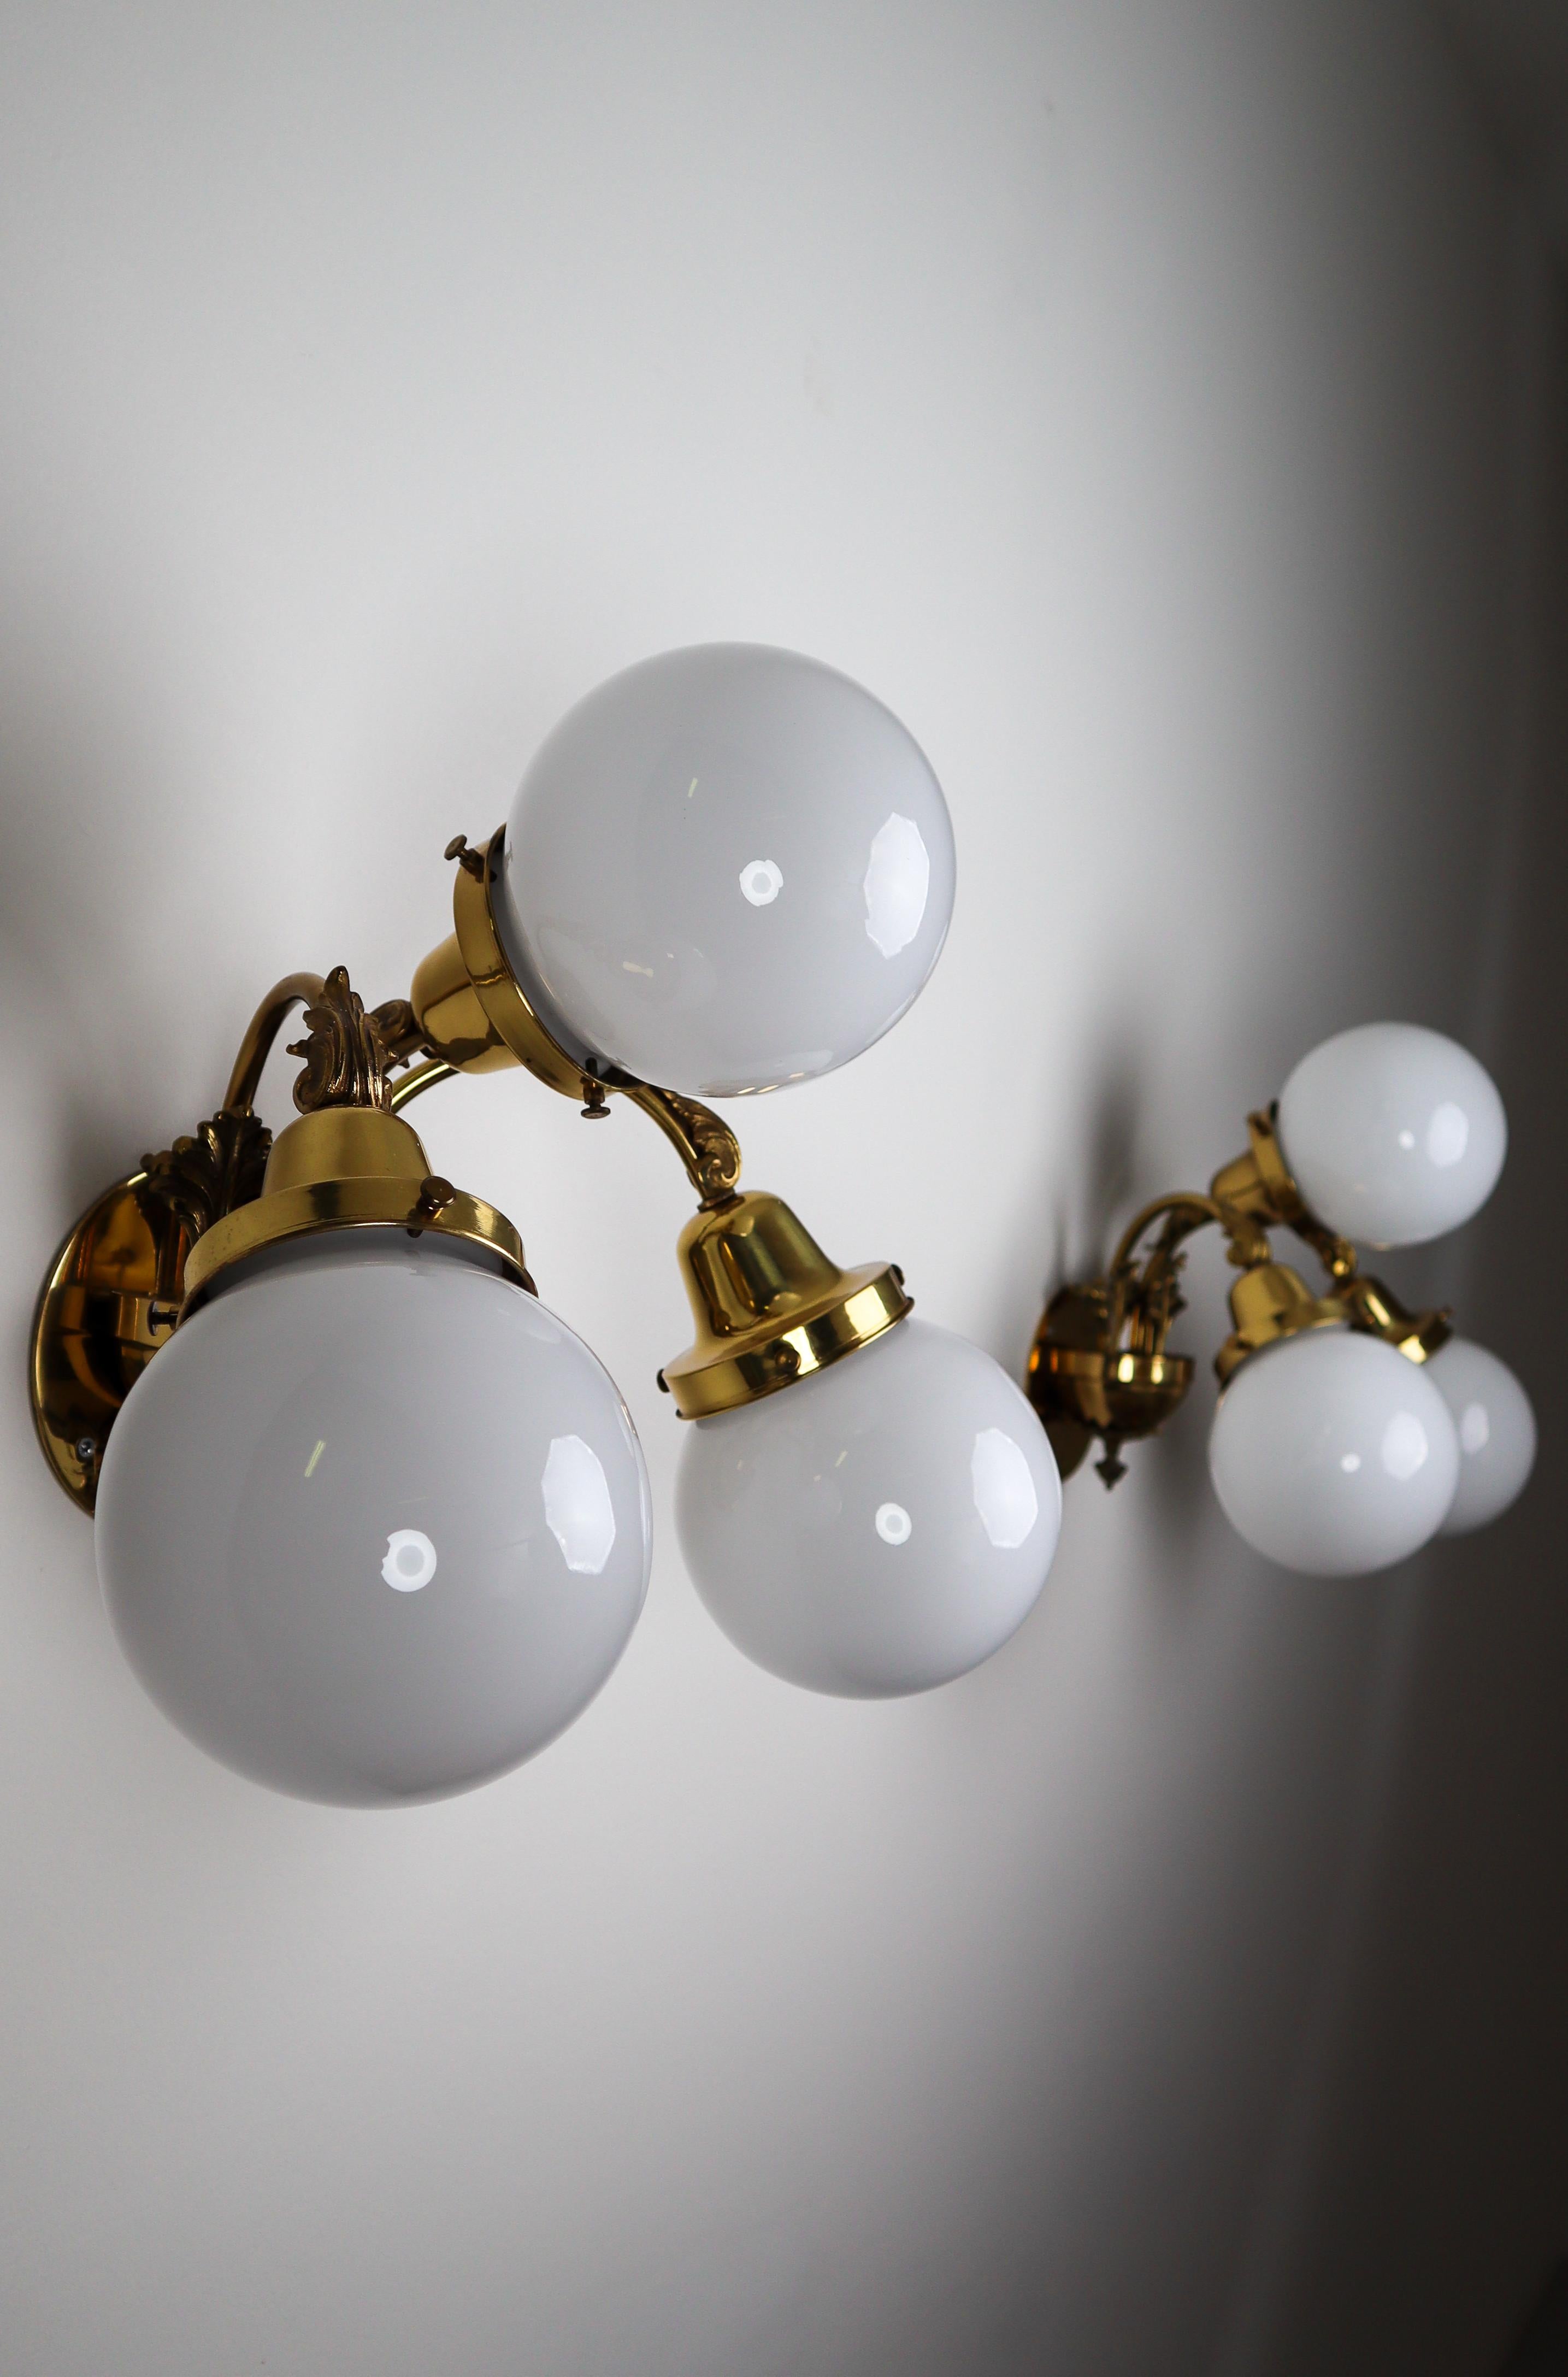 Monumental brass wall lights with opaline glass globes from the National Gallery Praque.

Monumental and chic design wall lights with high quality brass fixture and luxury opaline glass globes. These wall lights with brass frame consist of three